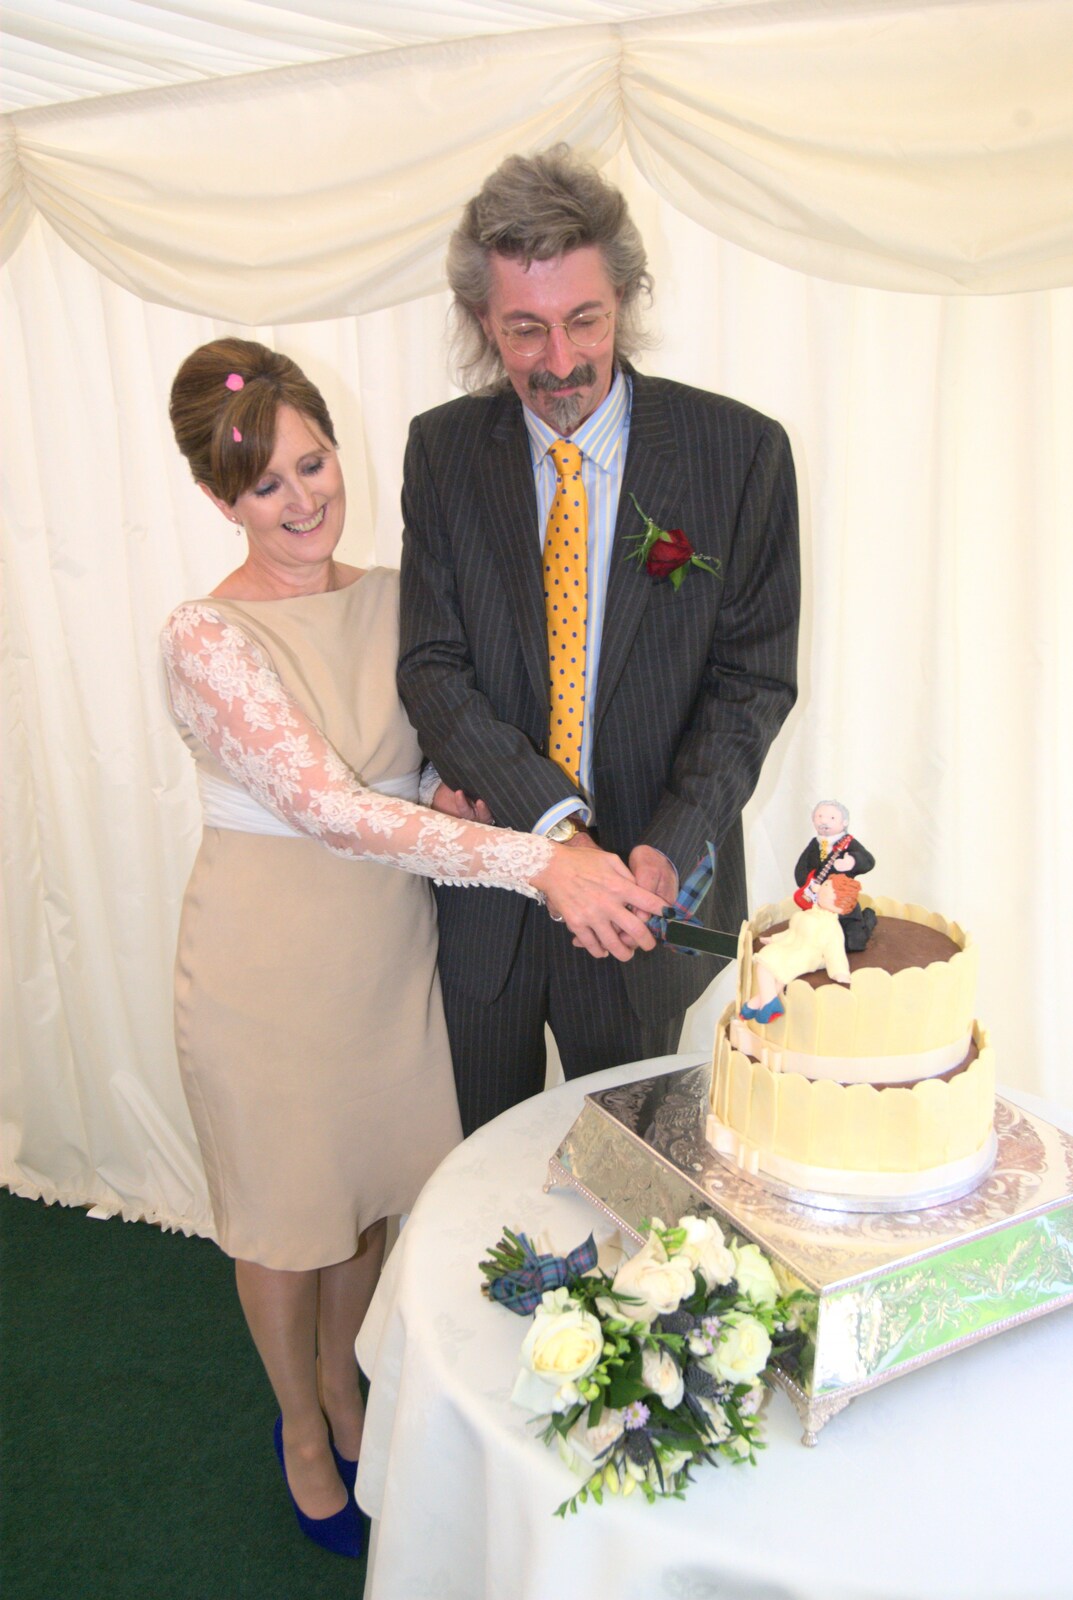 Wilma and Rob cut the cake from Rob and Wilma's Wedding, Thornham and Thrandeston, Suffolk - 6th August 2011